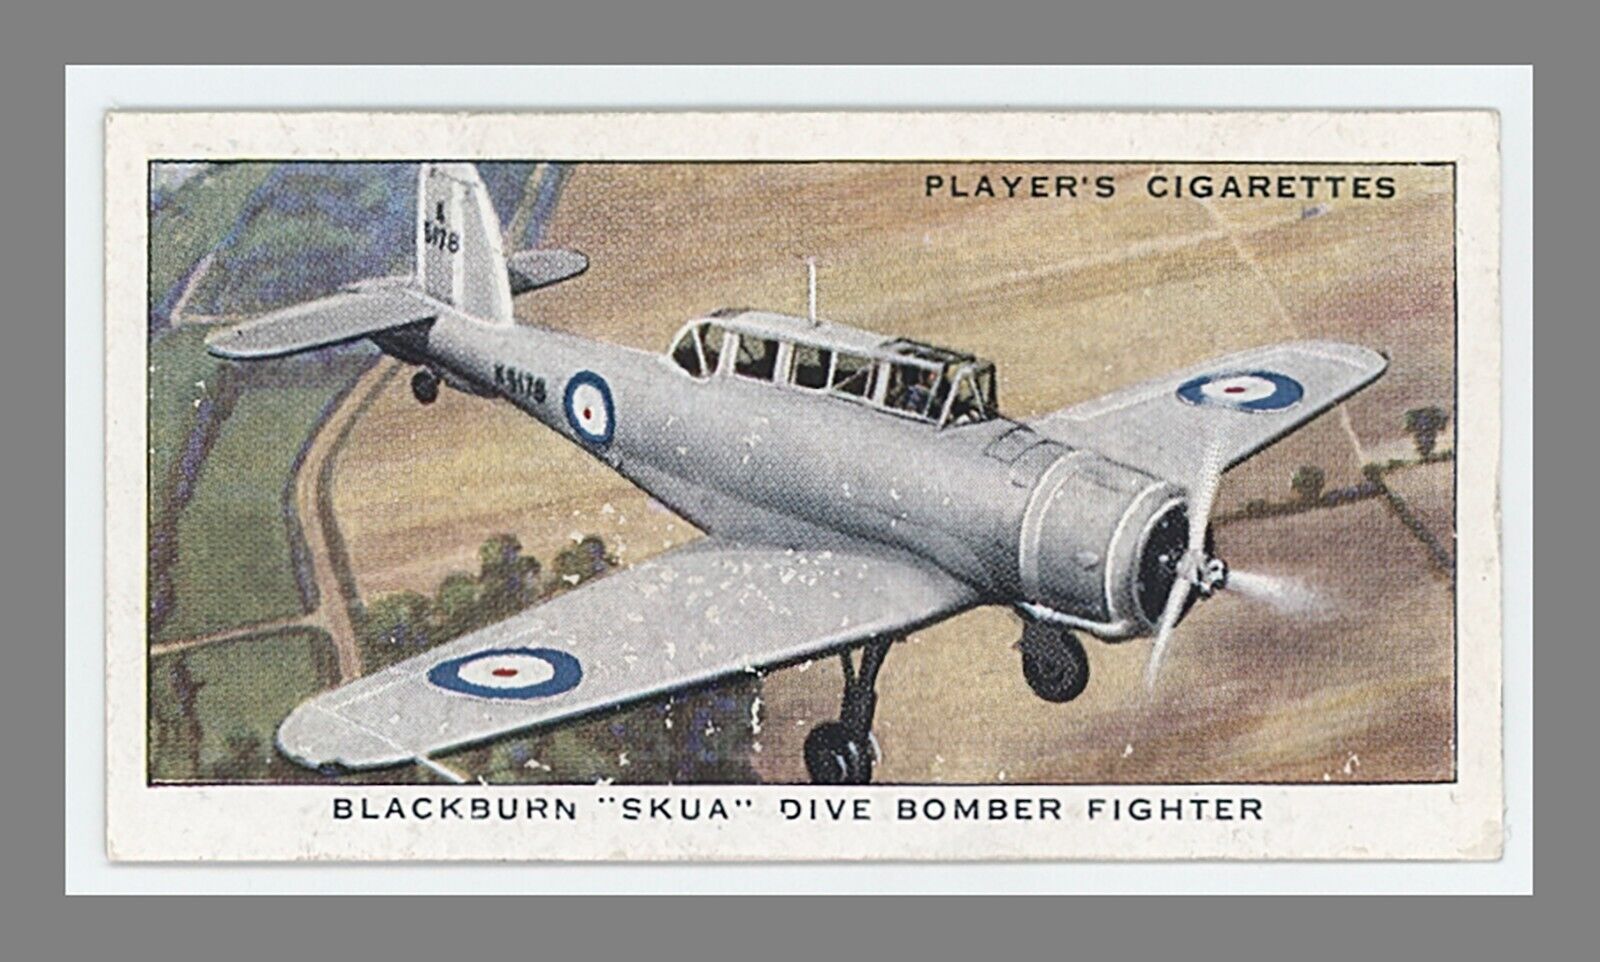 Players Cigarettes Royal Air Force Skua Dive Bomber Fighter John Player Sons